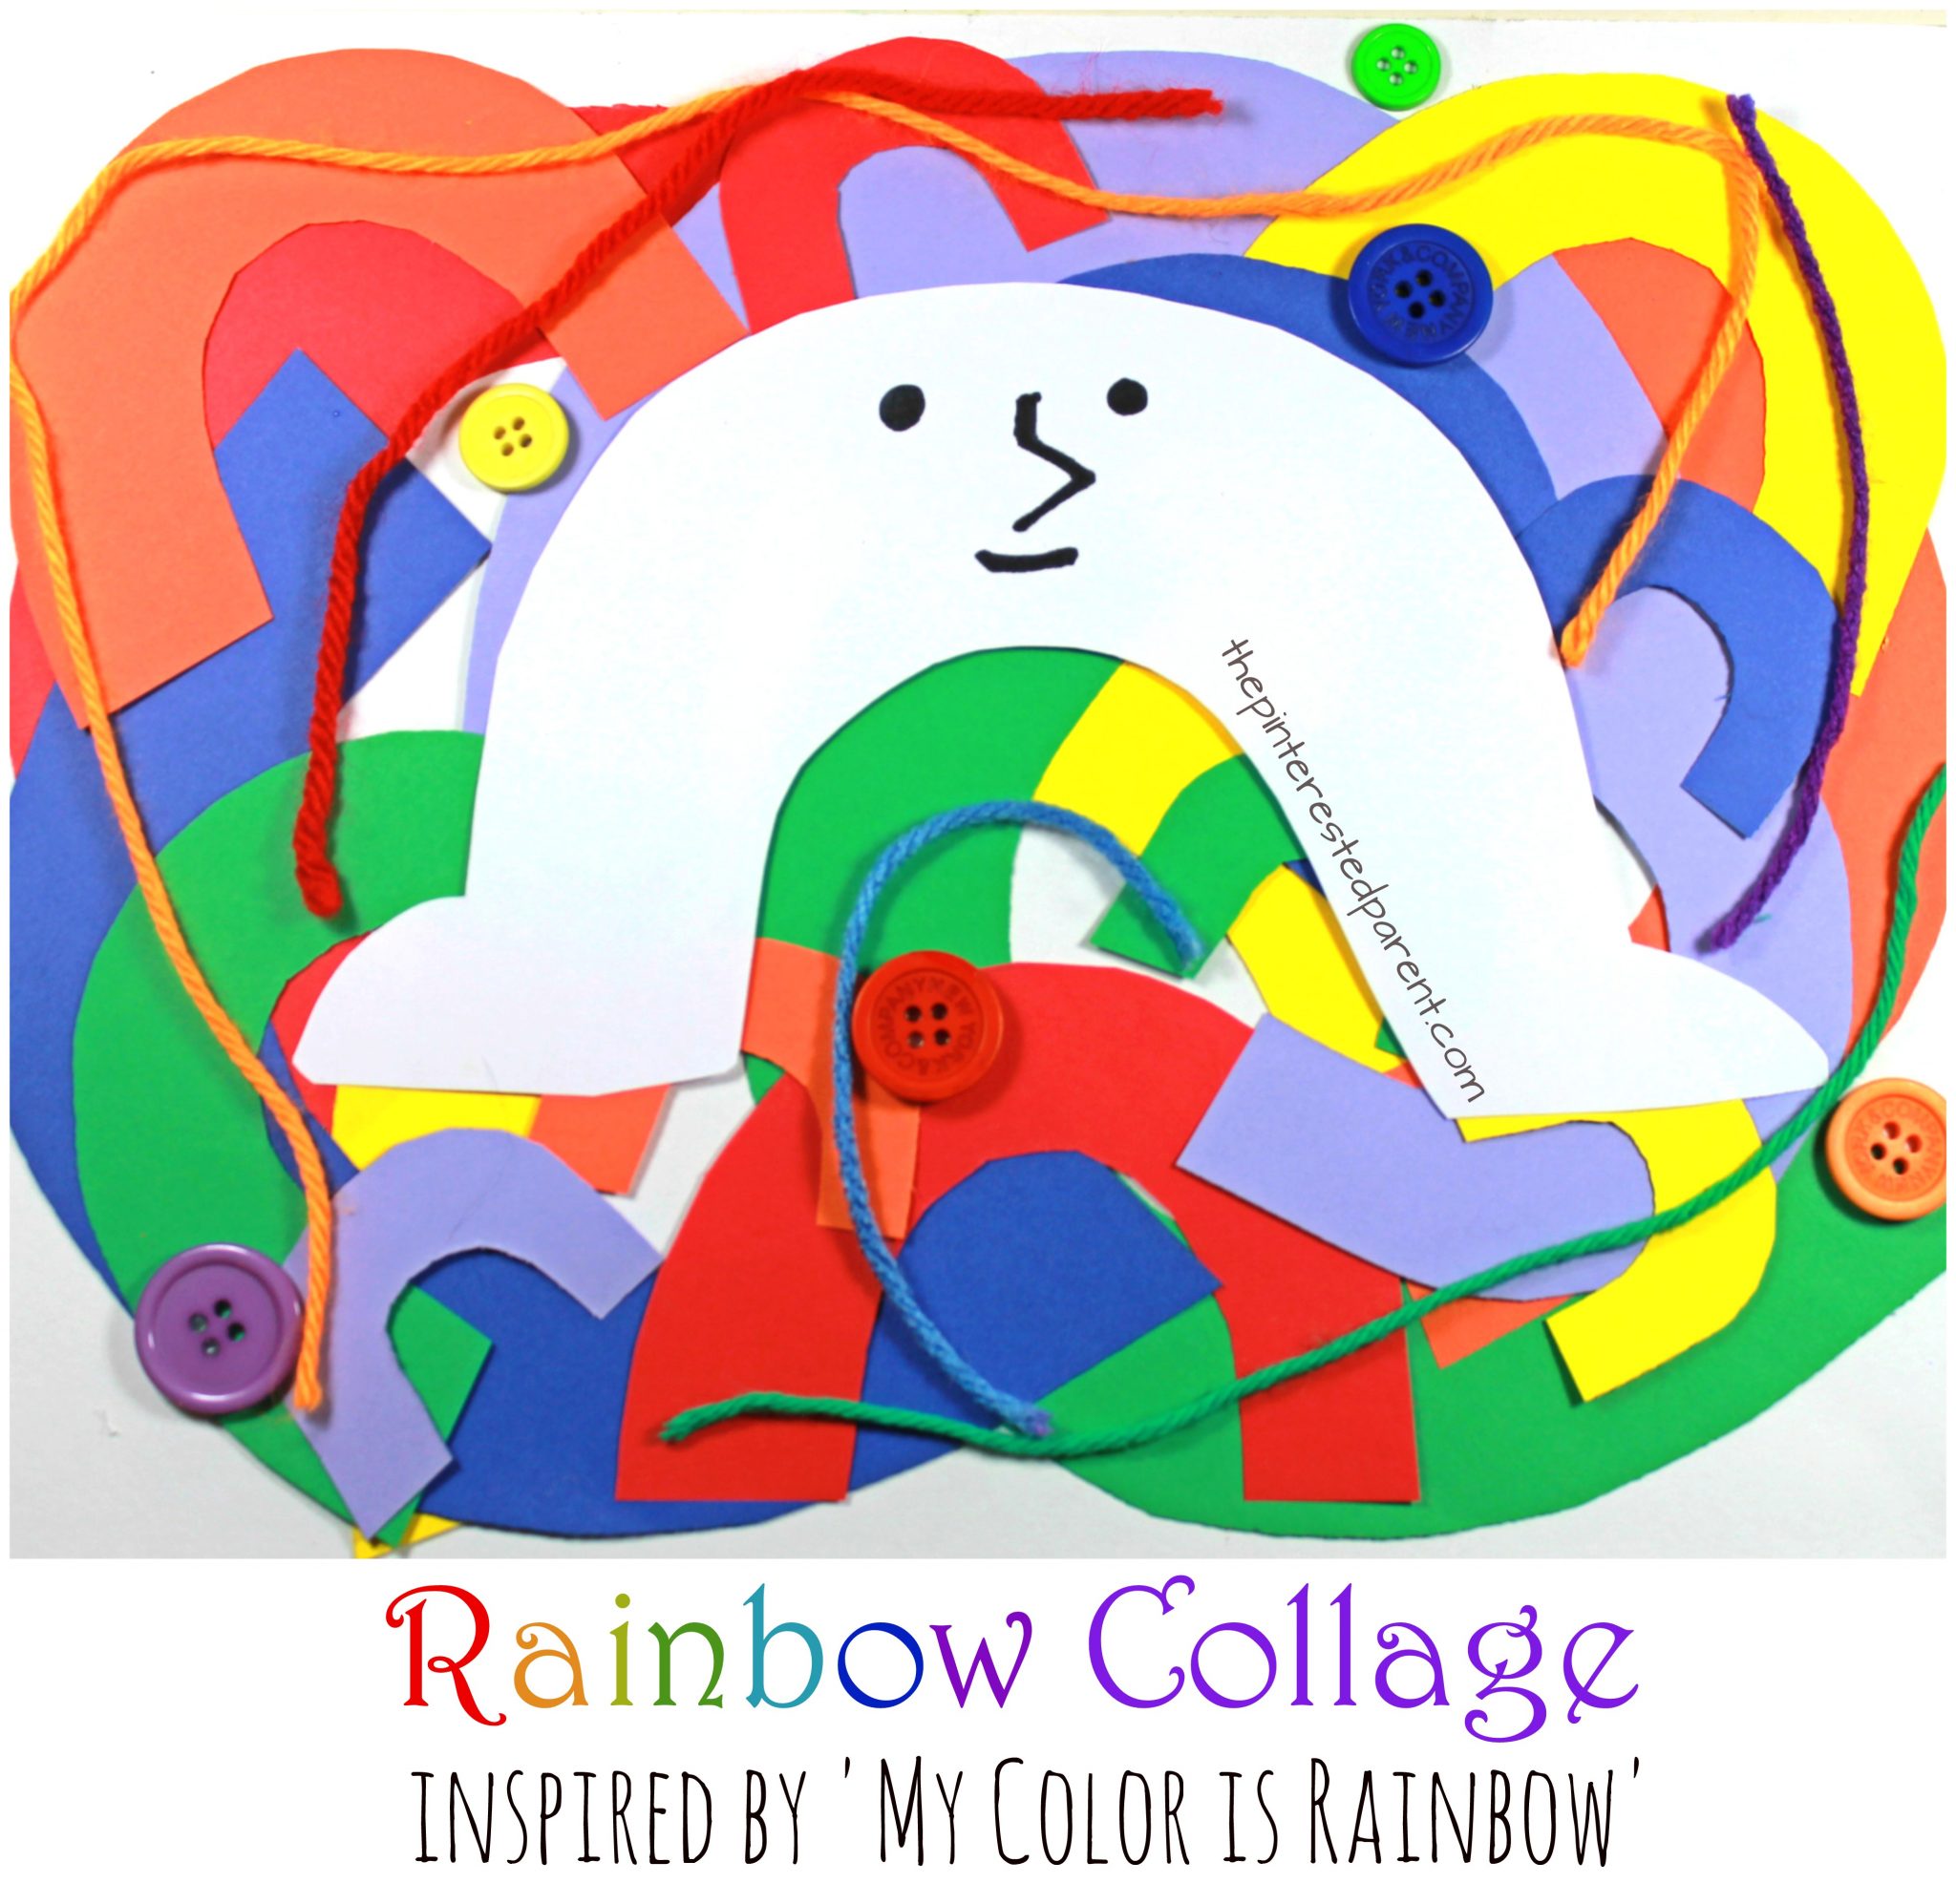 Rainbow Collage craft inspired by the book 'My Color is Rainbow'. Spring arts and crafts for kids and preschoolers. Construction paper, yarn, buttons.